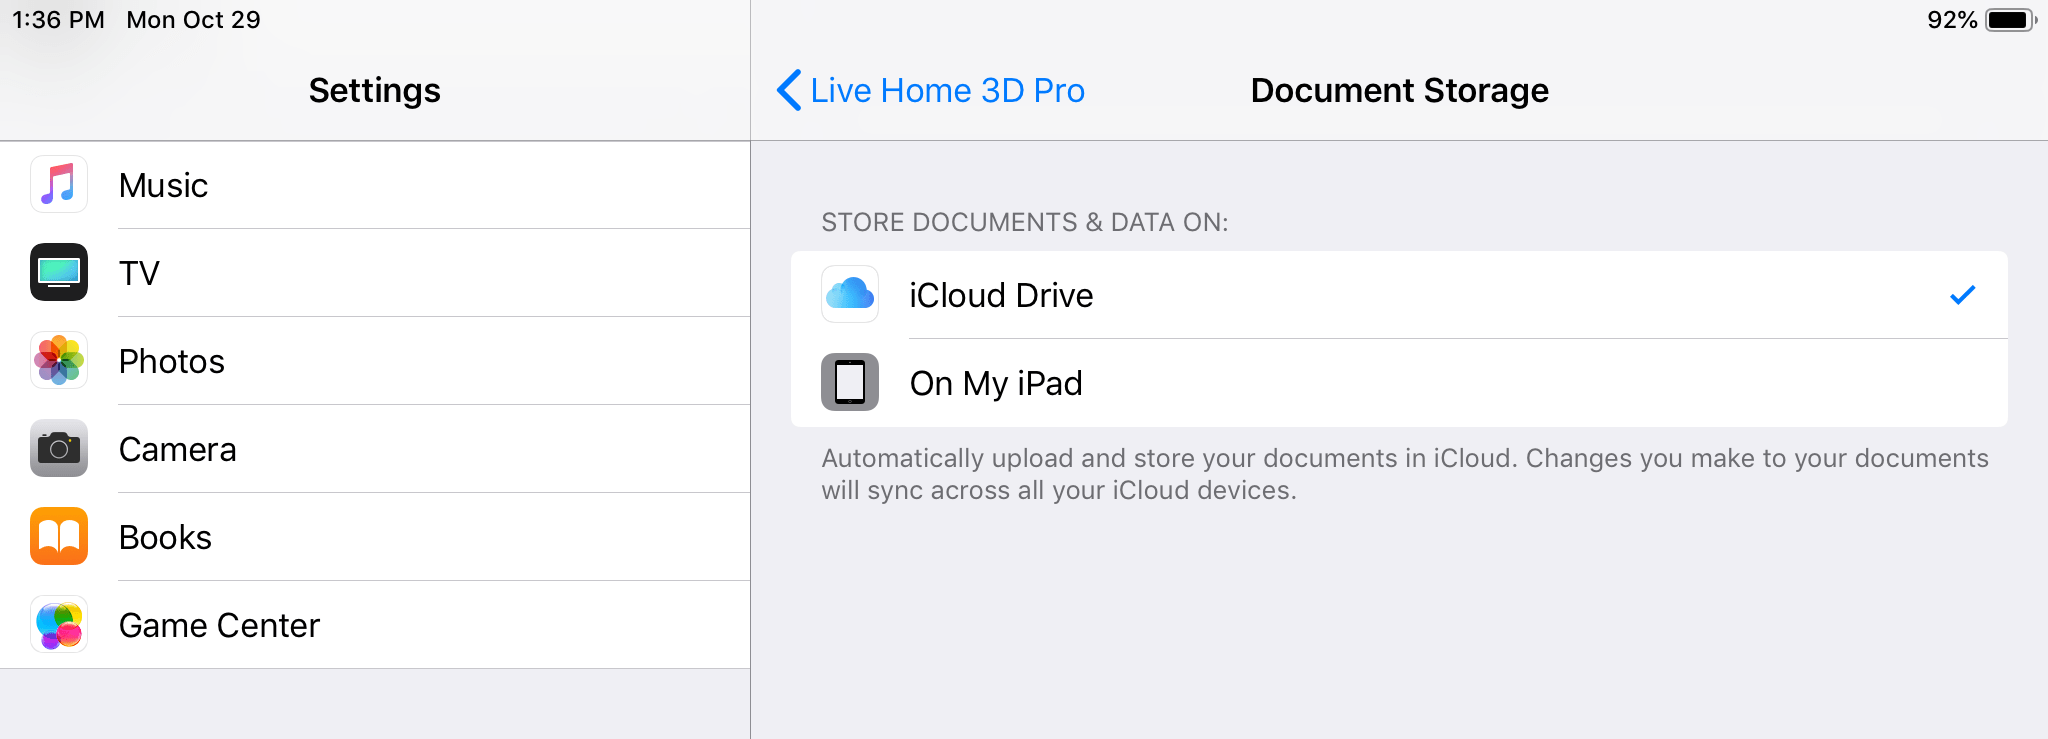 List of storage options in Live Home 3D settings